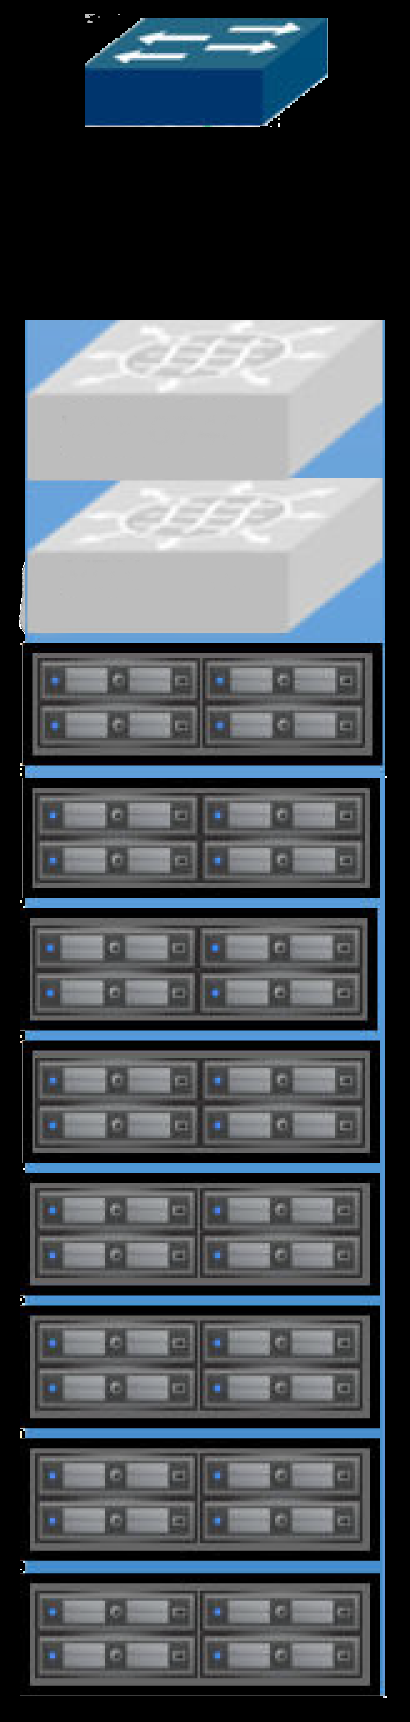 Brocade VDX VMware EVORAIL VMware EVORAIL Brocade VDX Existing Upstream Switches Can be one Brocade VDX 6740 ToR (or) Two